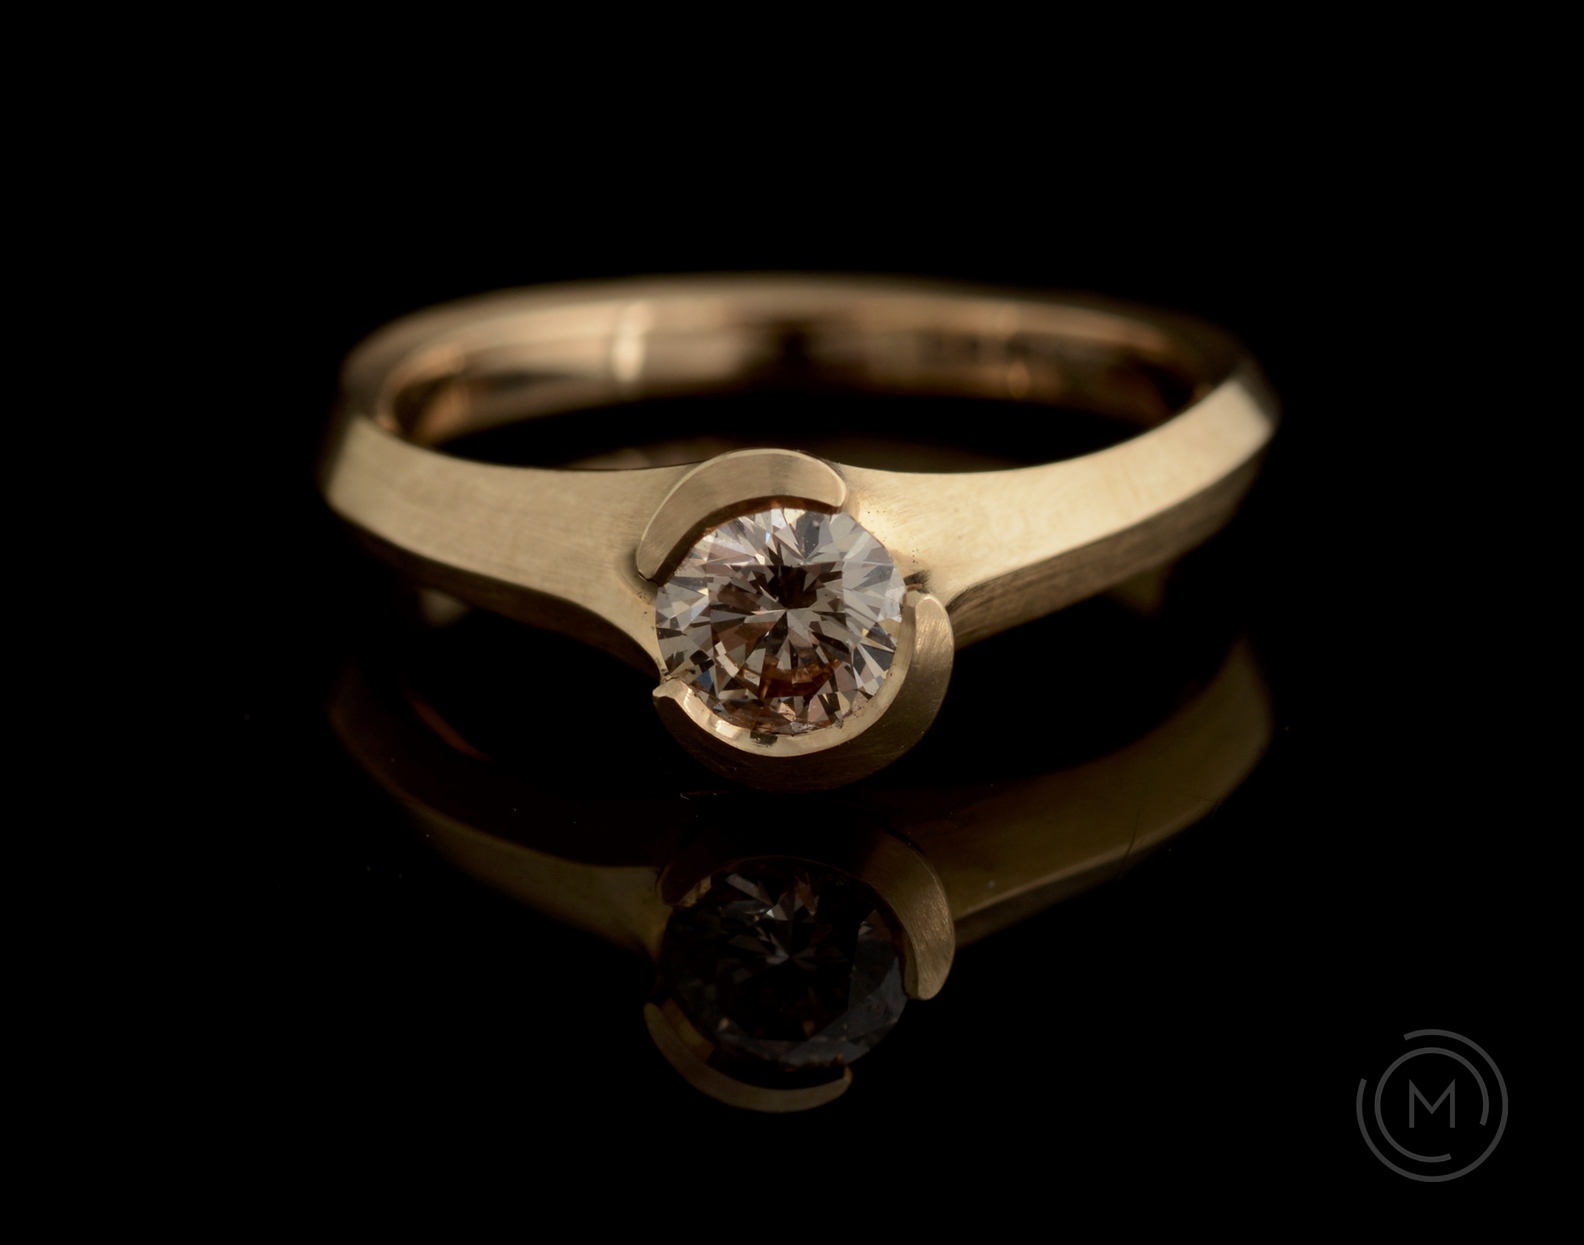 Arris hand-carved modern engagement ring with cognac diamond